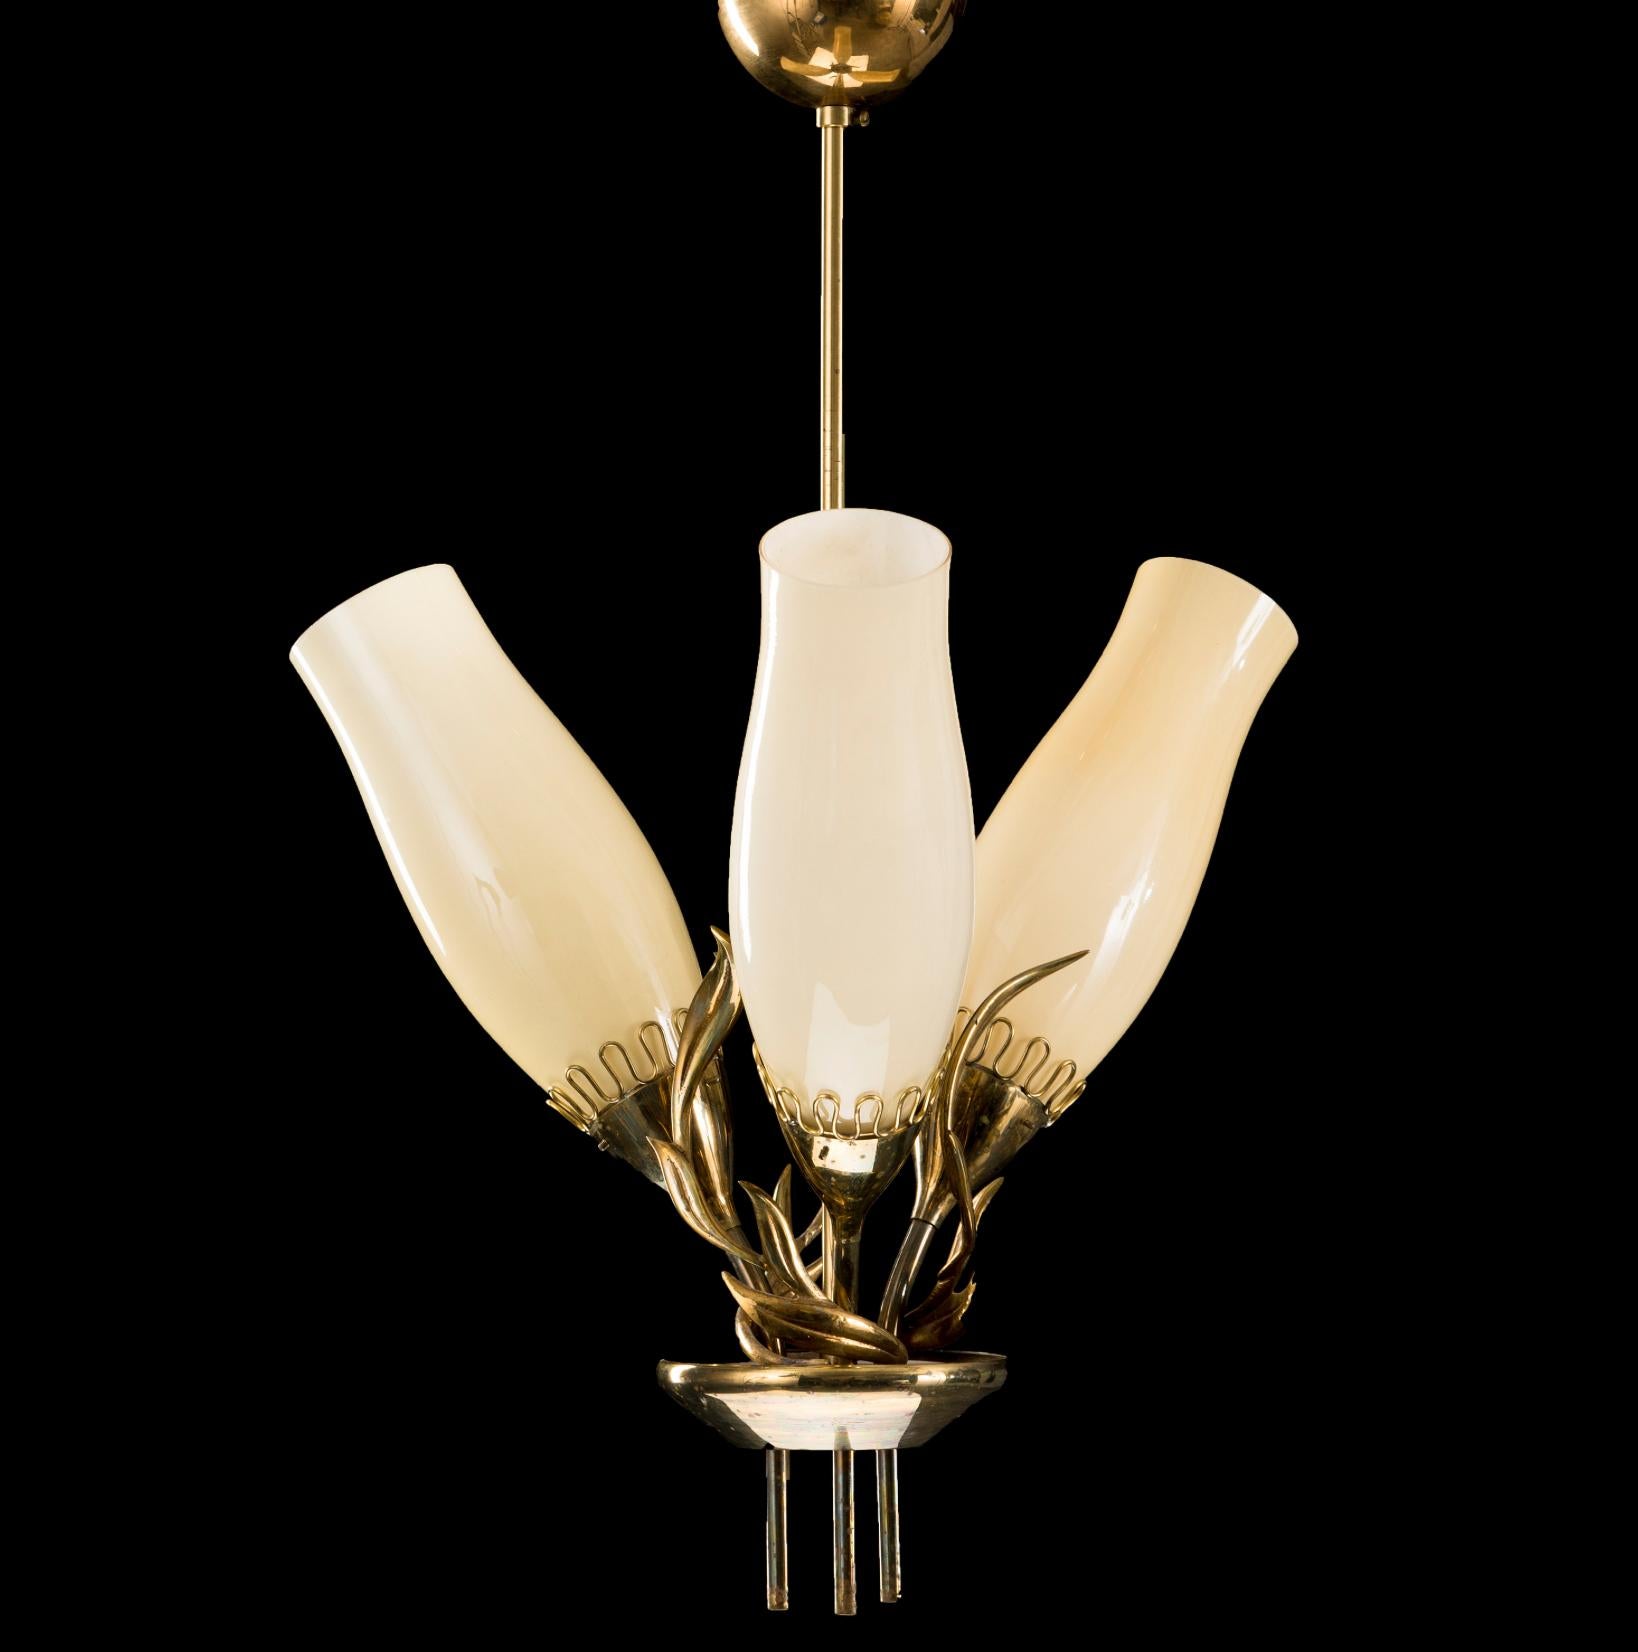 A  chandelier designed by Mauri Almari for Idman Oy, Model 51122. Finland, circa 1950s.
Featured on Idman catalog No 132, page 7.
Polished brass with three original glass shades. Measure: H 27.5